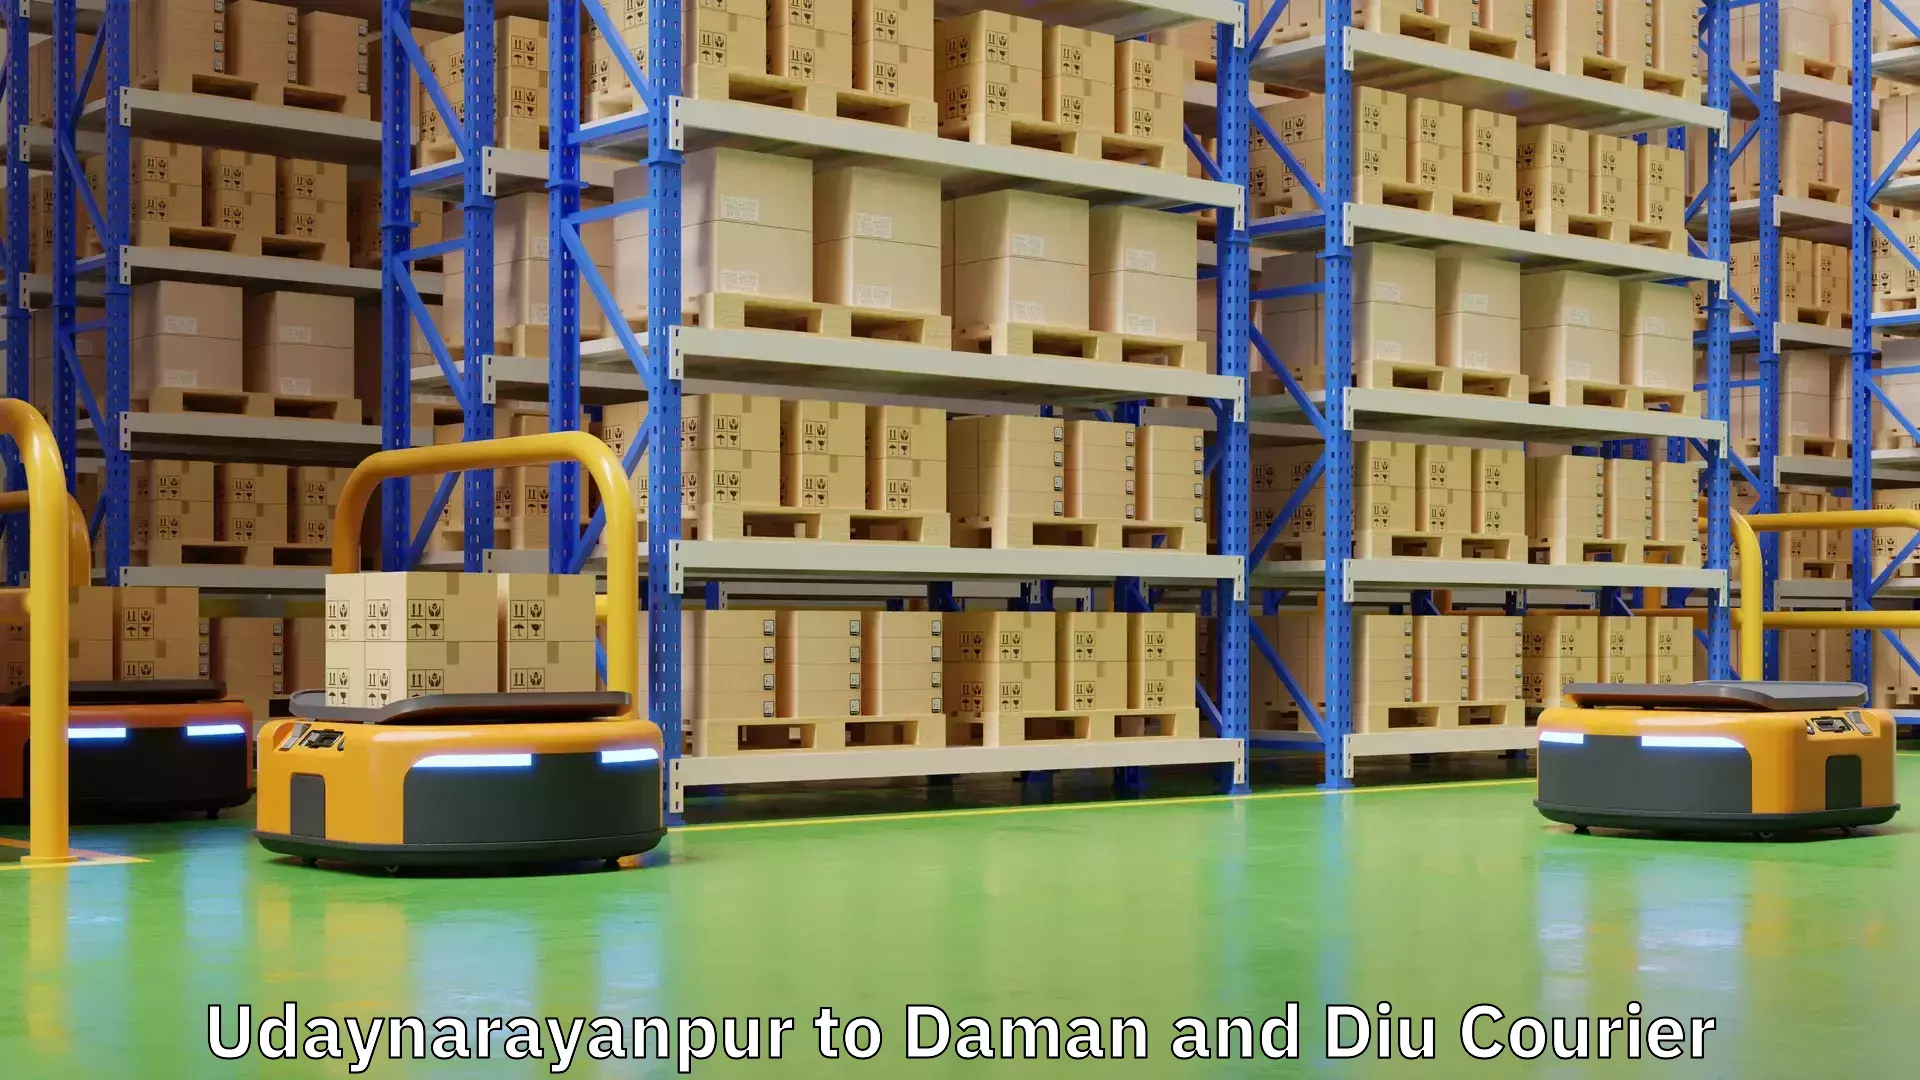 Automated parcel services Udaynarayanpur to Daman and Diu